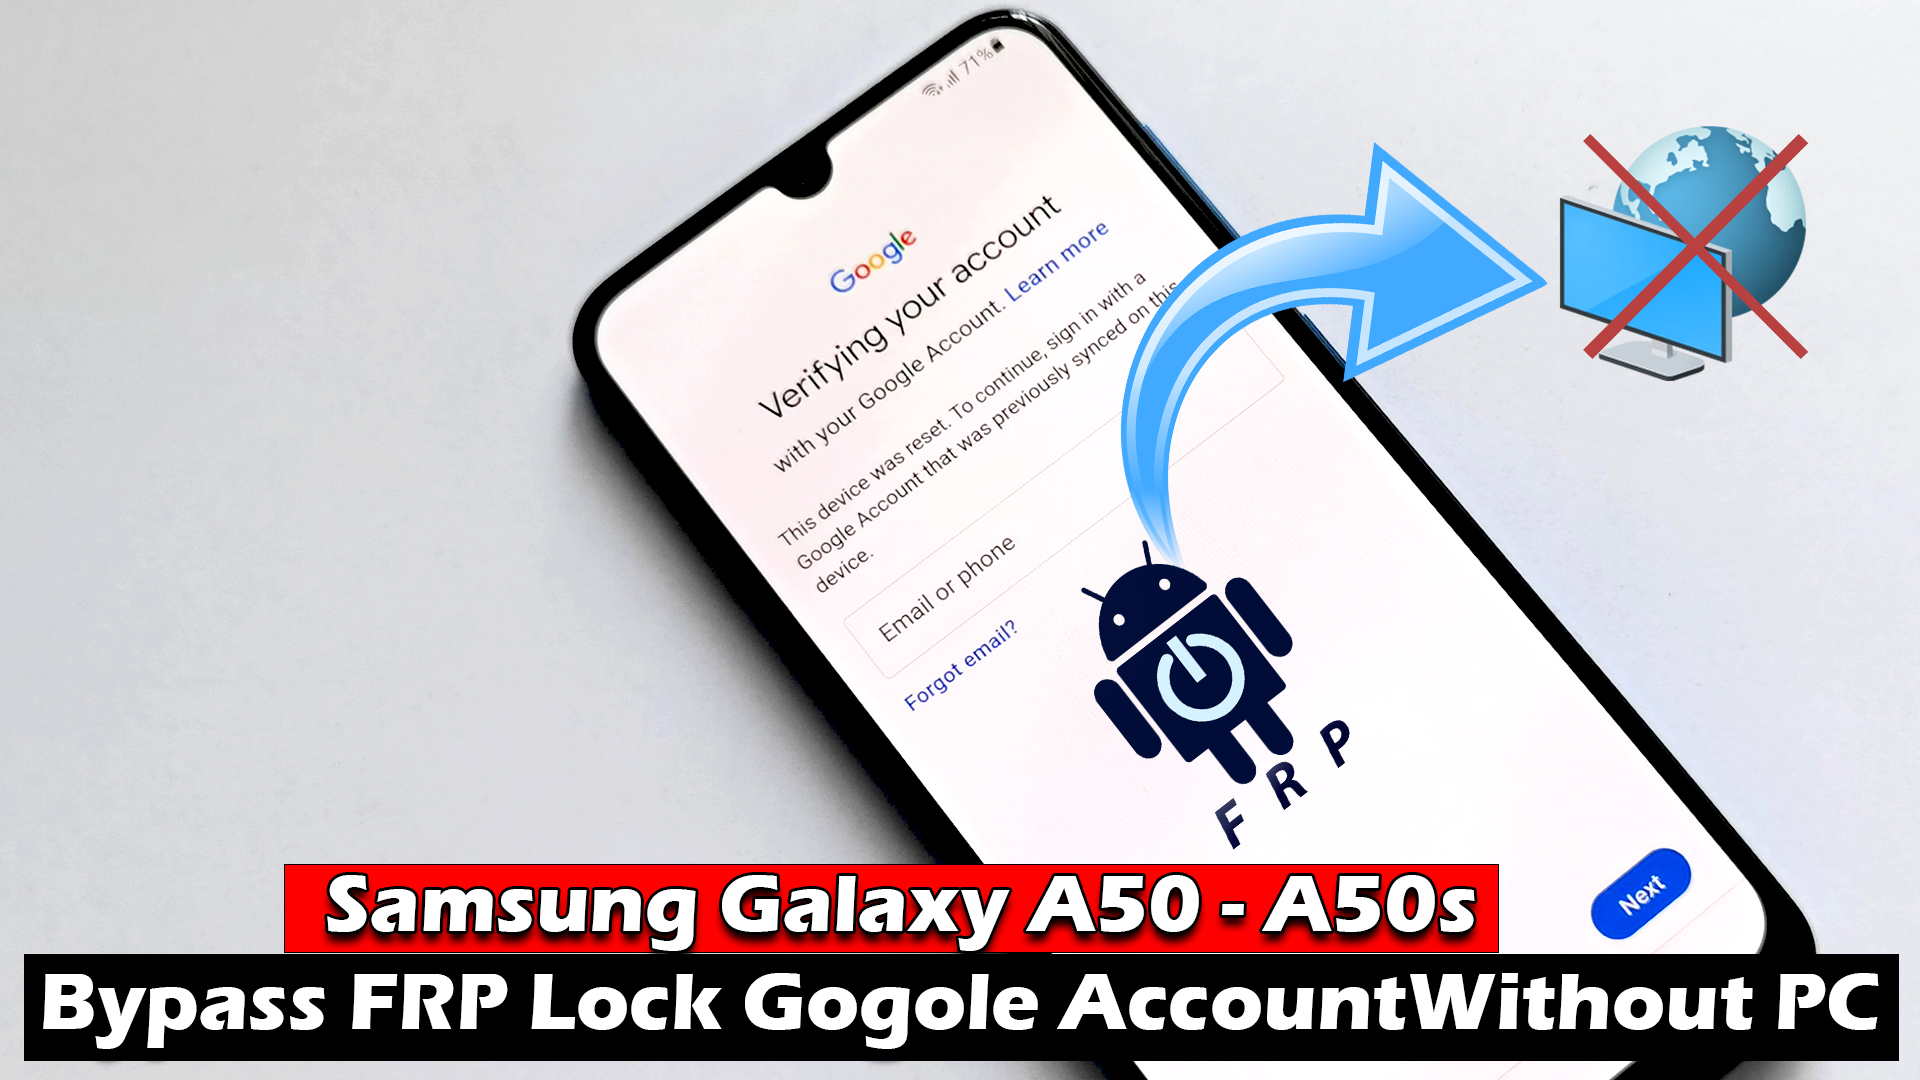 Bypass FRP Lock Gogole Account Samsung Galaxy A50 - A50s Without PC - ICTfix